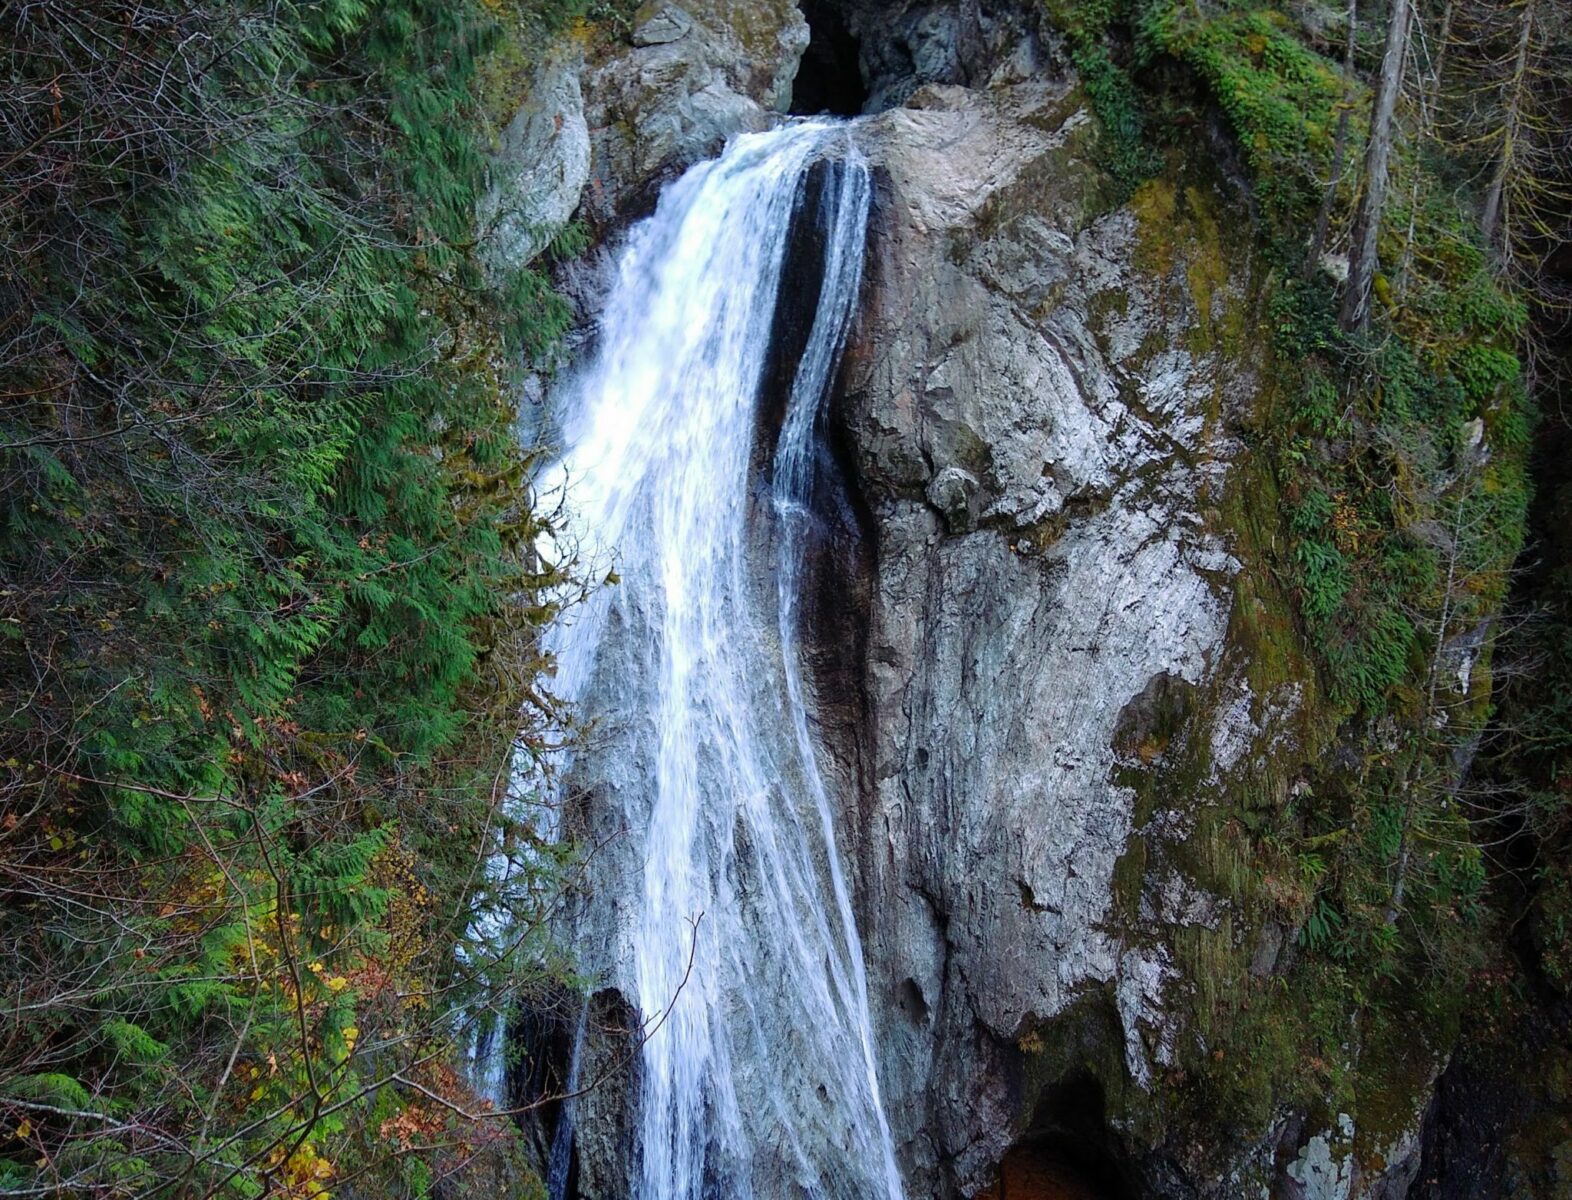 A wide and high waterfall cascades over a vertical rock face. There are trees and green shrubs around it on one of the best winter hikes near seattle, twin falls